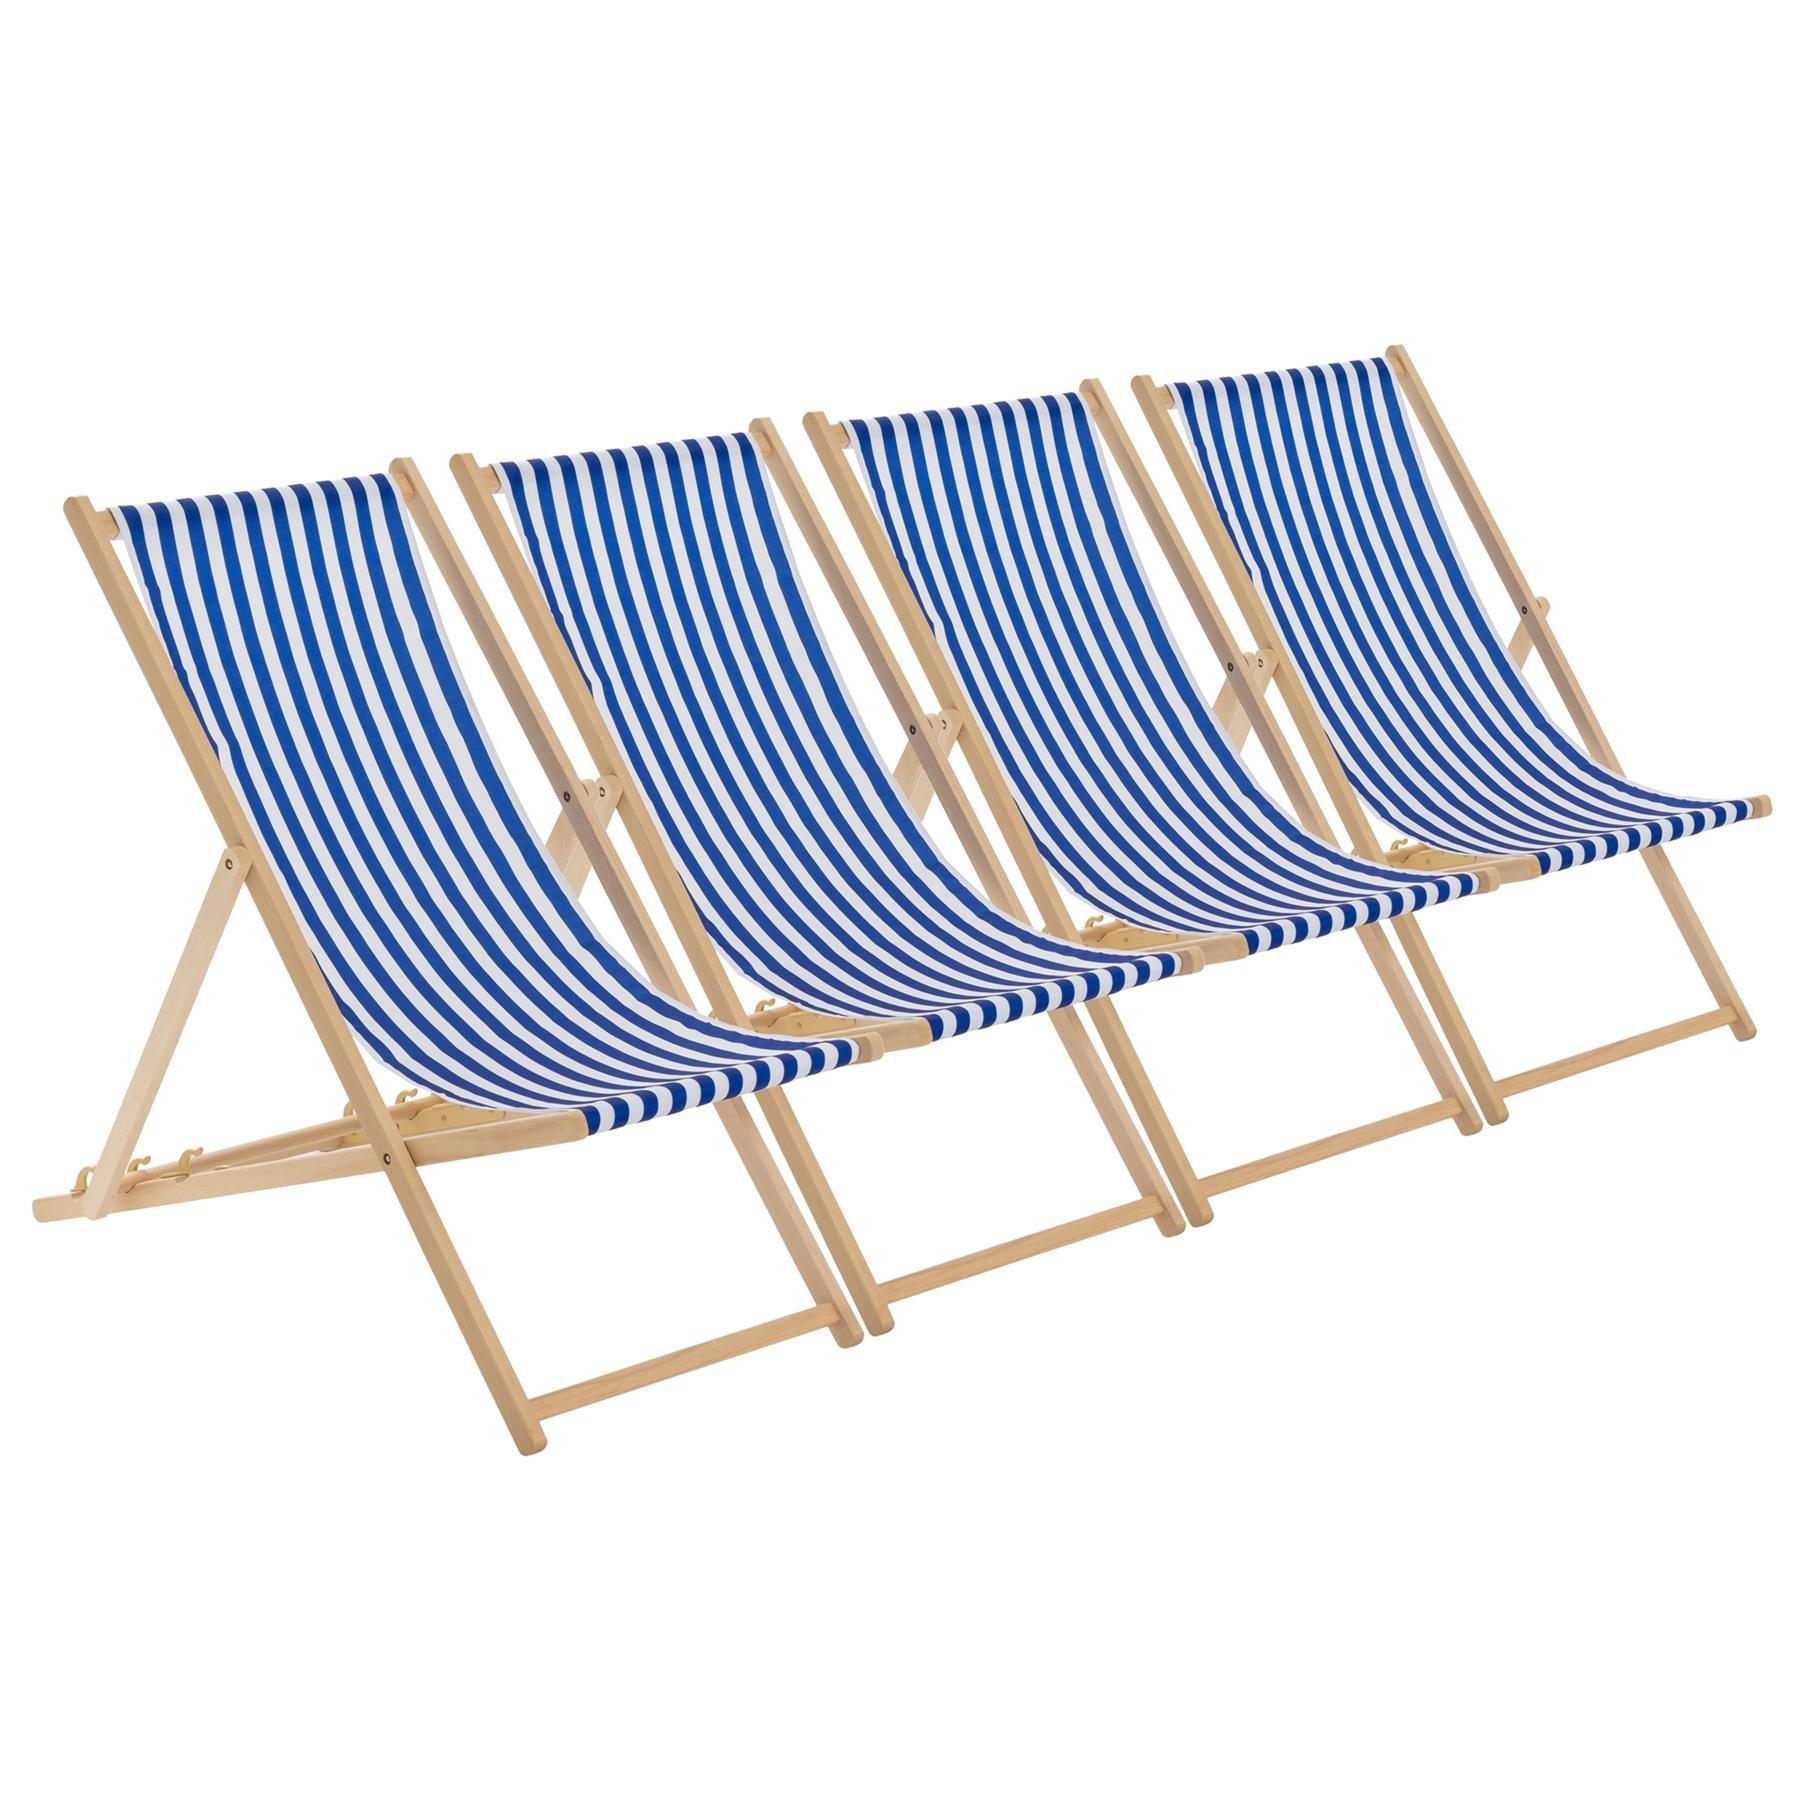 Folding Wooden Deck Chairs Navy Stripe Pack of 4